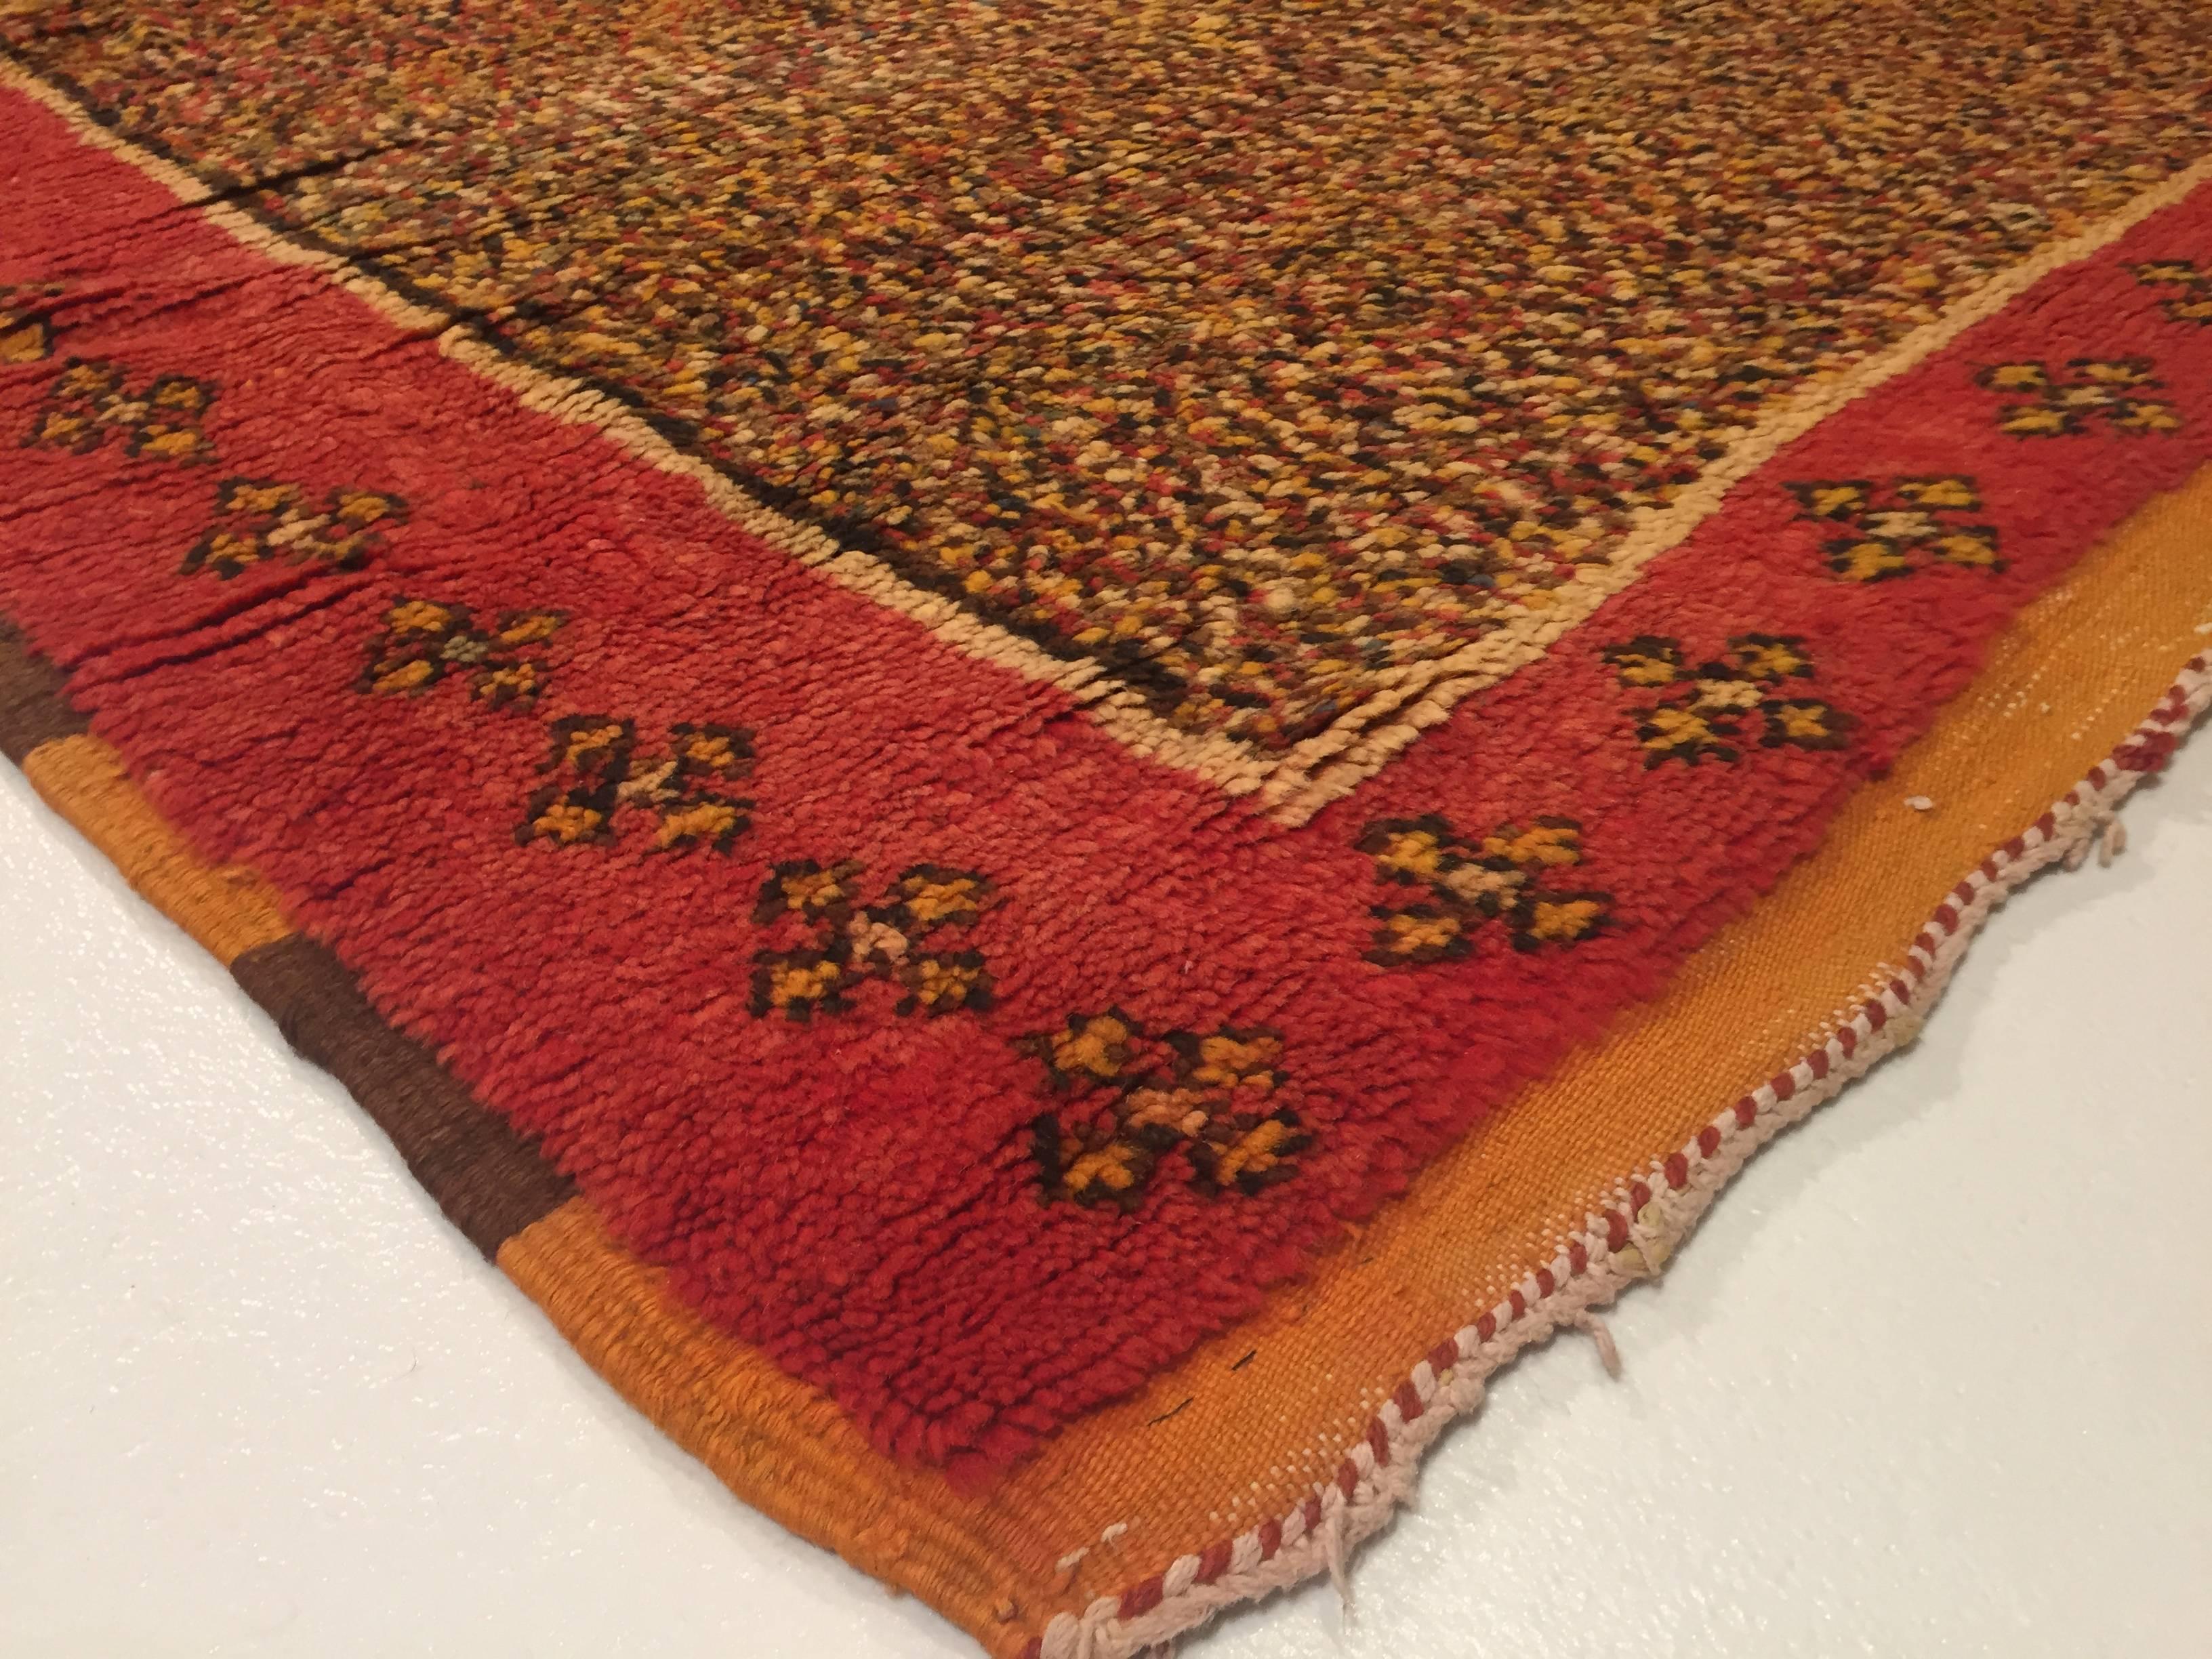 20th Century Yellow Orange Multi-Color Berber Tribal Moroccan Rug In Good Condition For Sale In Firenze, IT